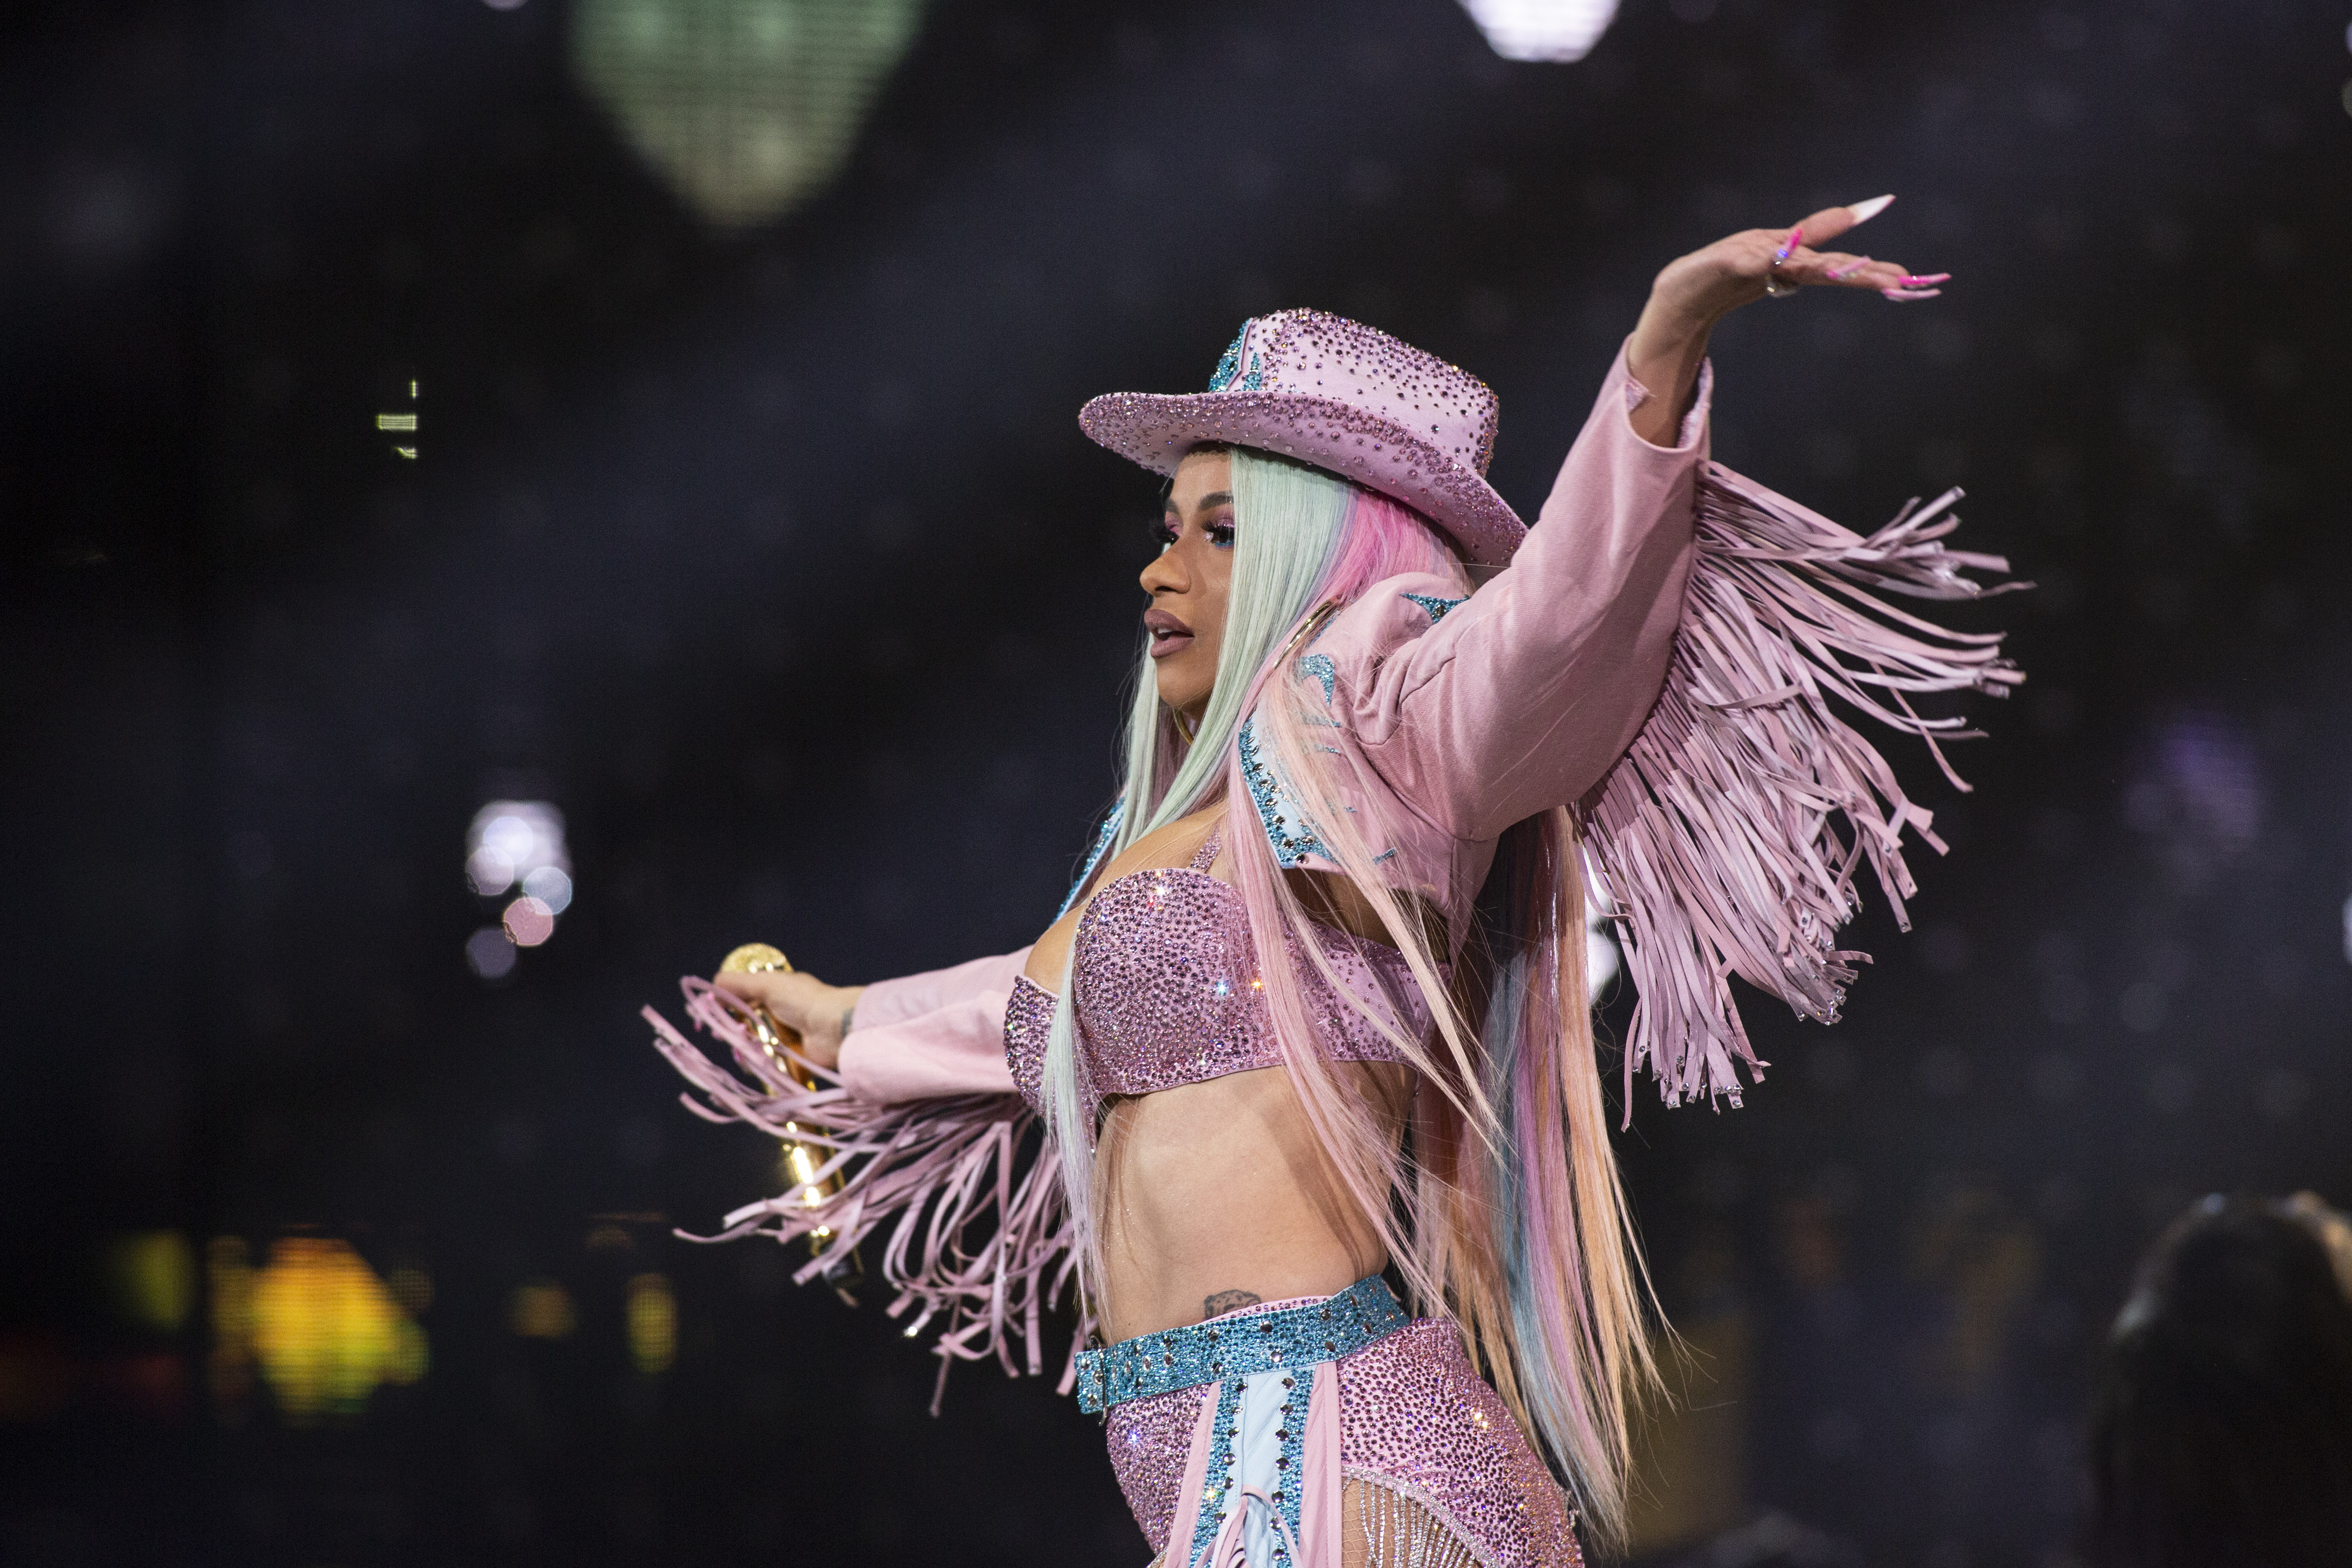 Cardi B Performs for Houston Livestock Show And Rodeo